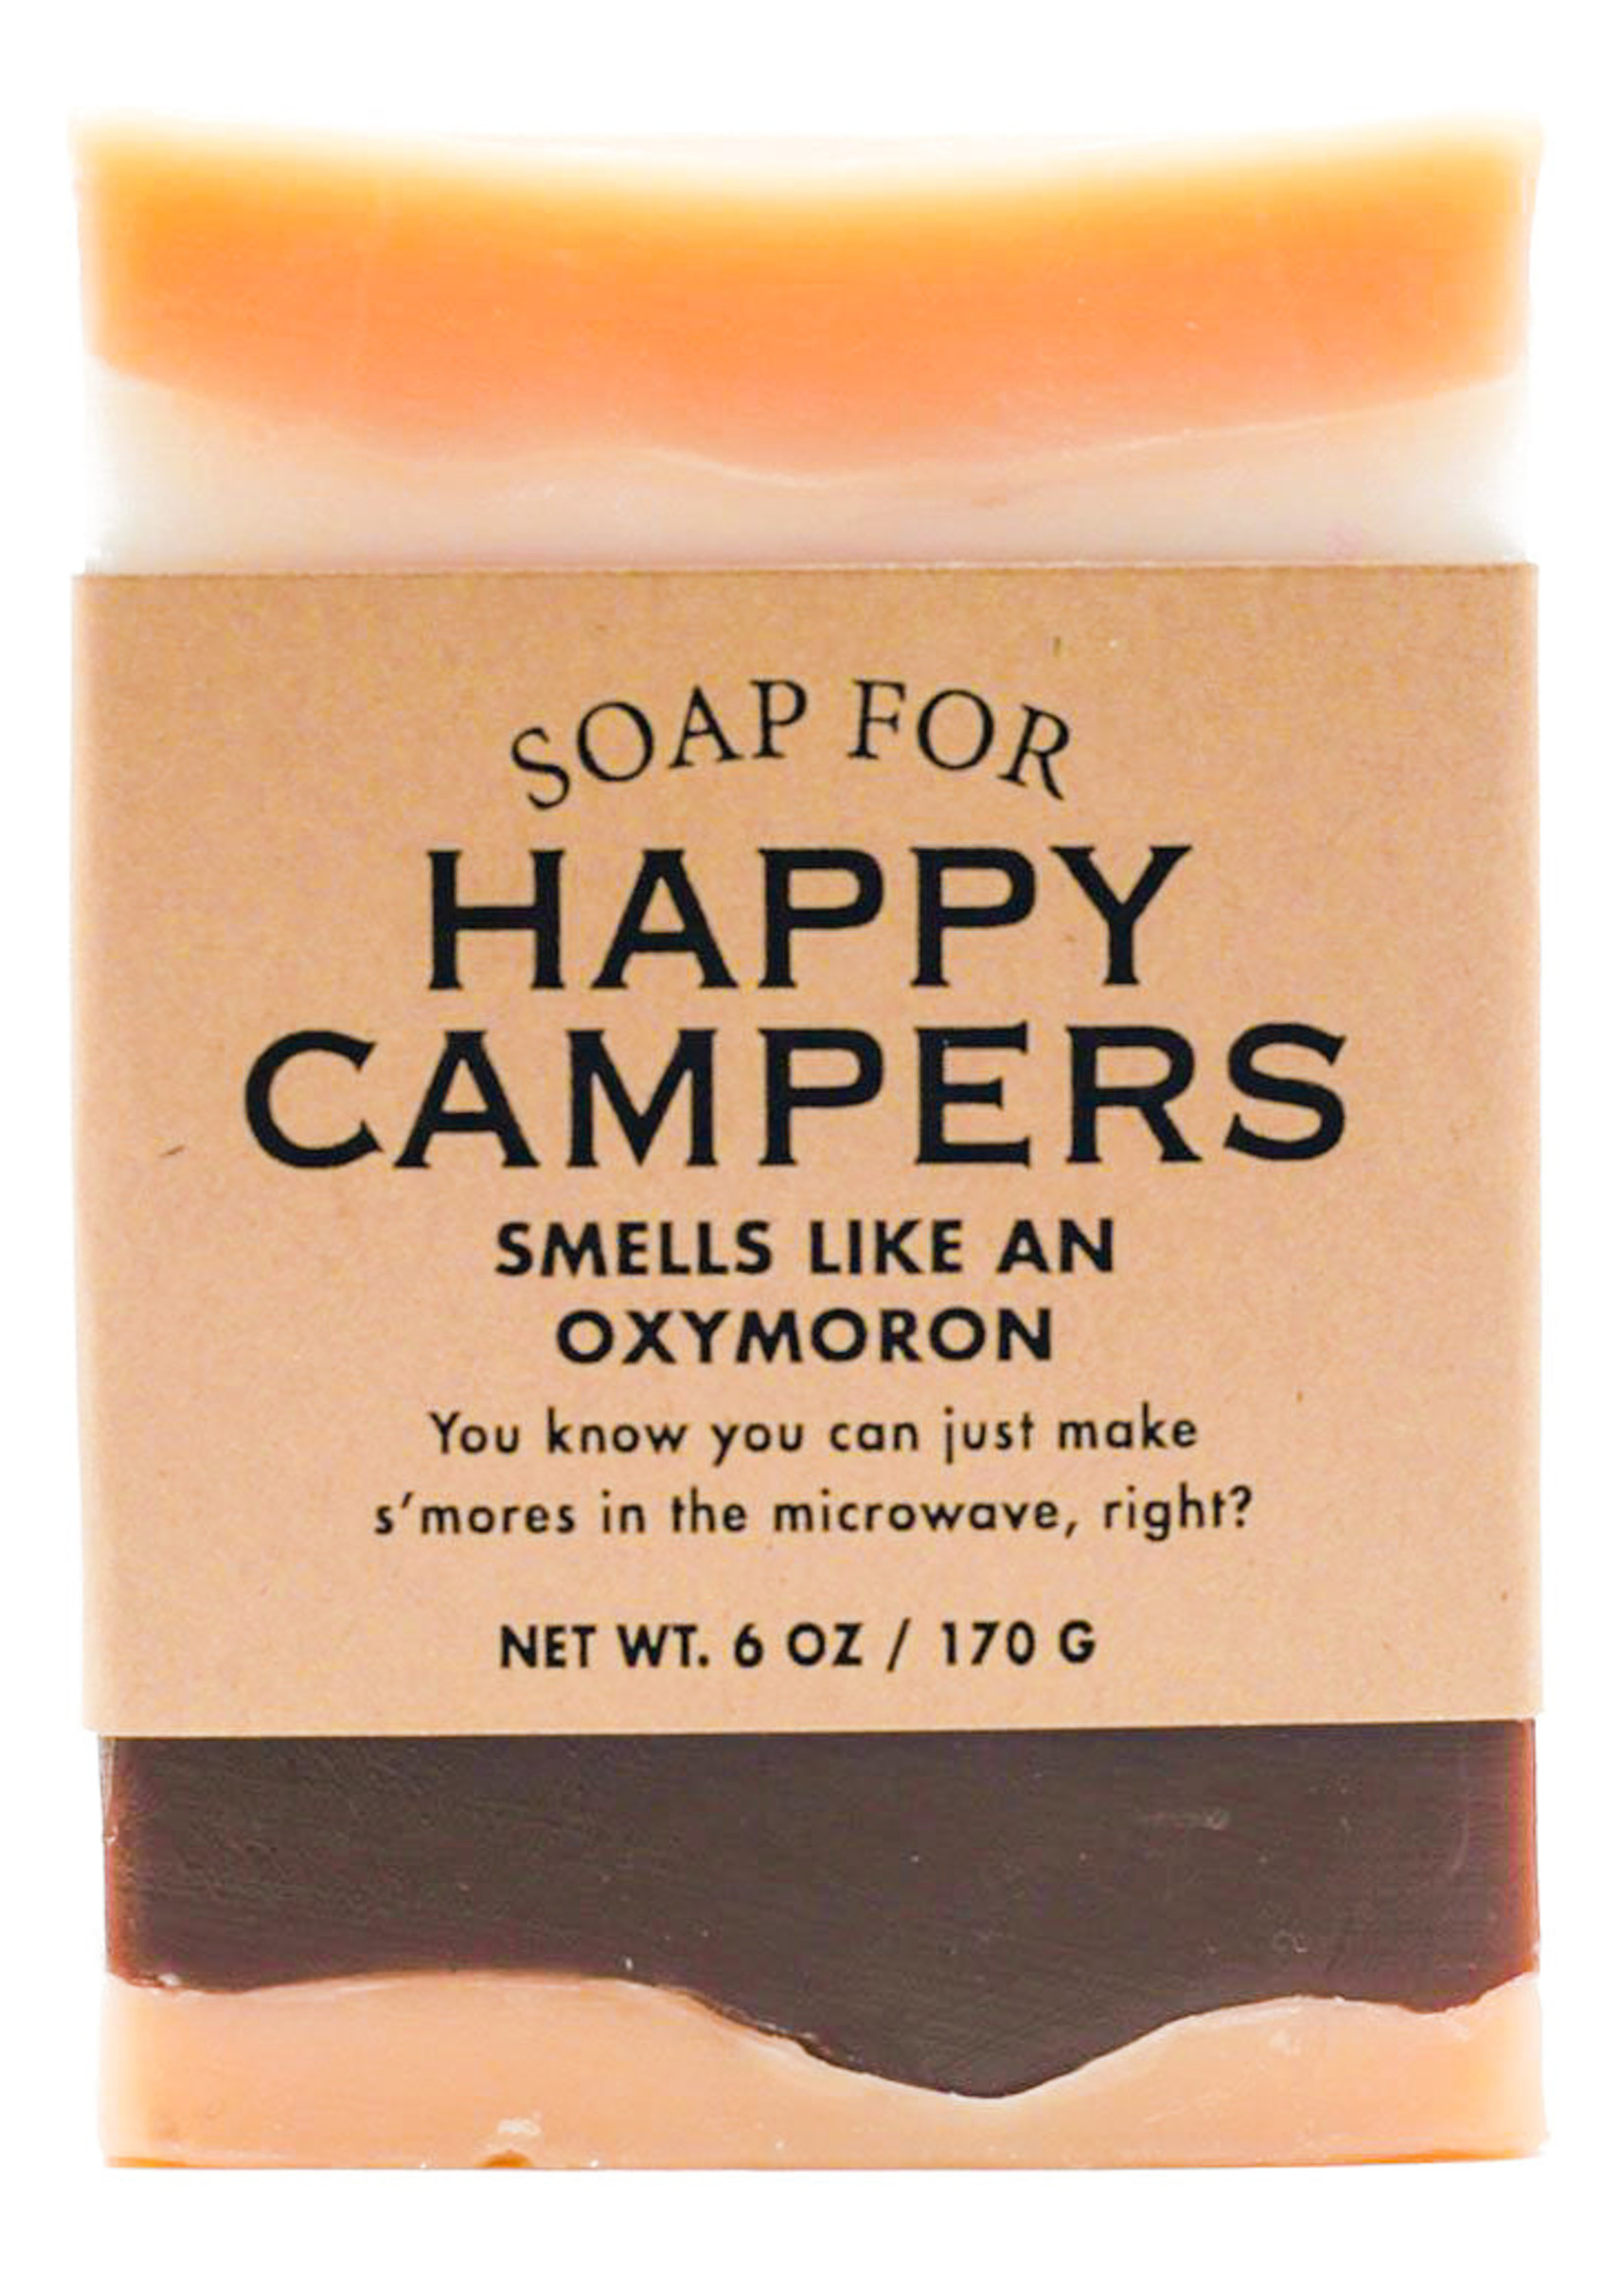 WHISKEY RIVER SOAP CO WHISKEY RIVER SOAP- VARIOUS TEXTS/SCENTS TO CHOOSE FROM